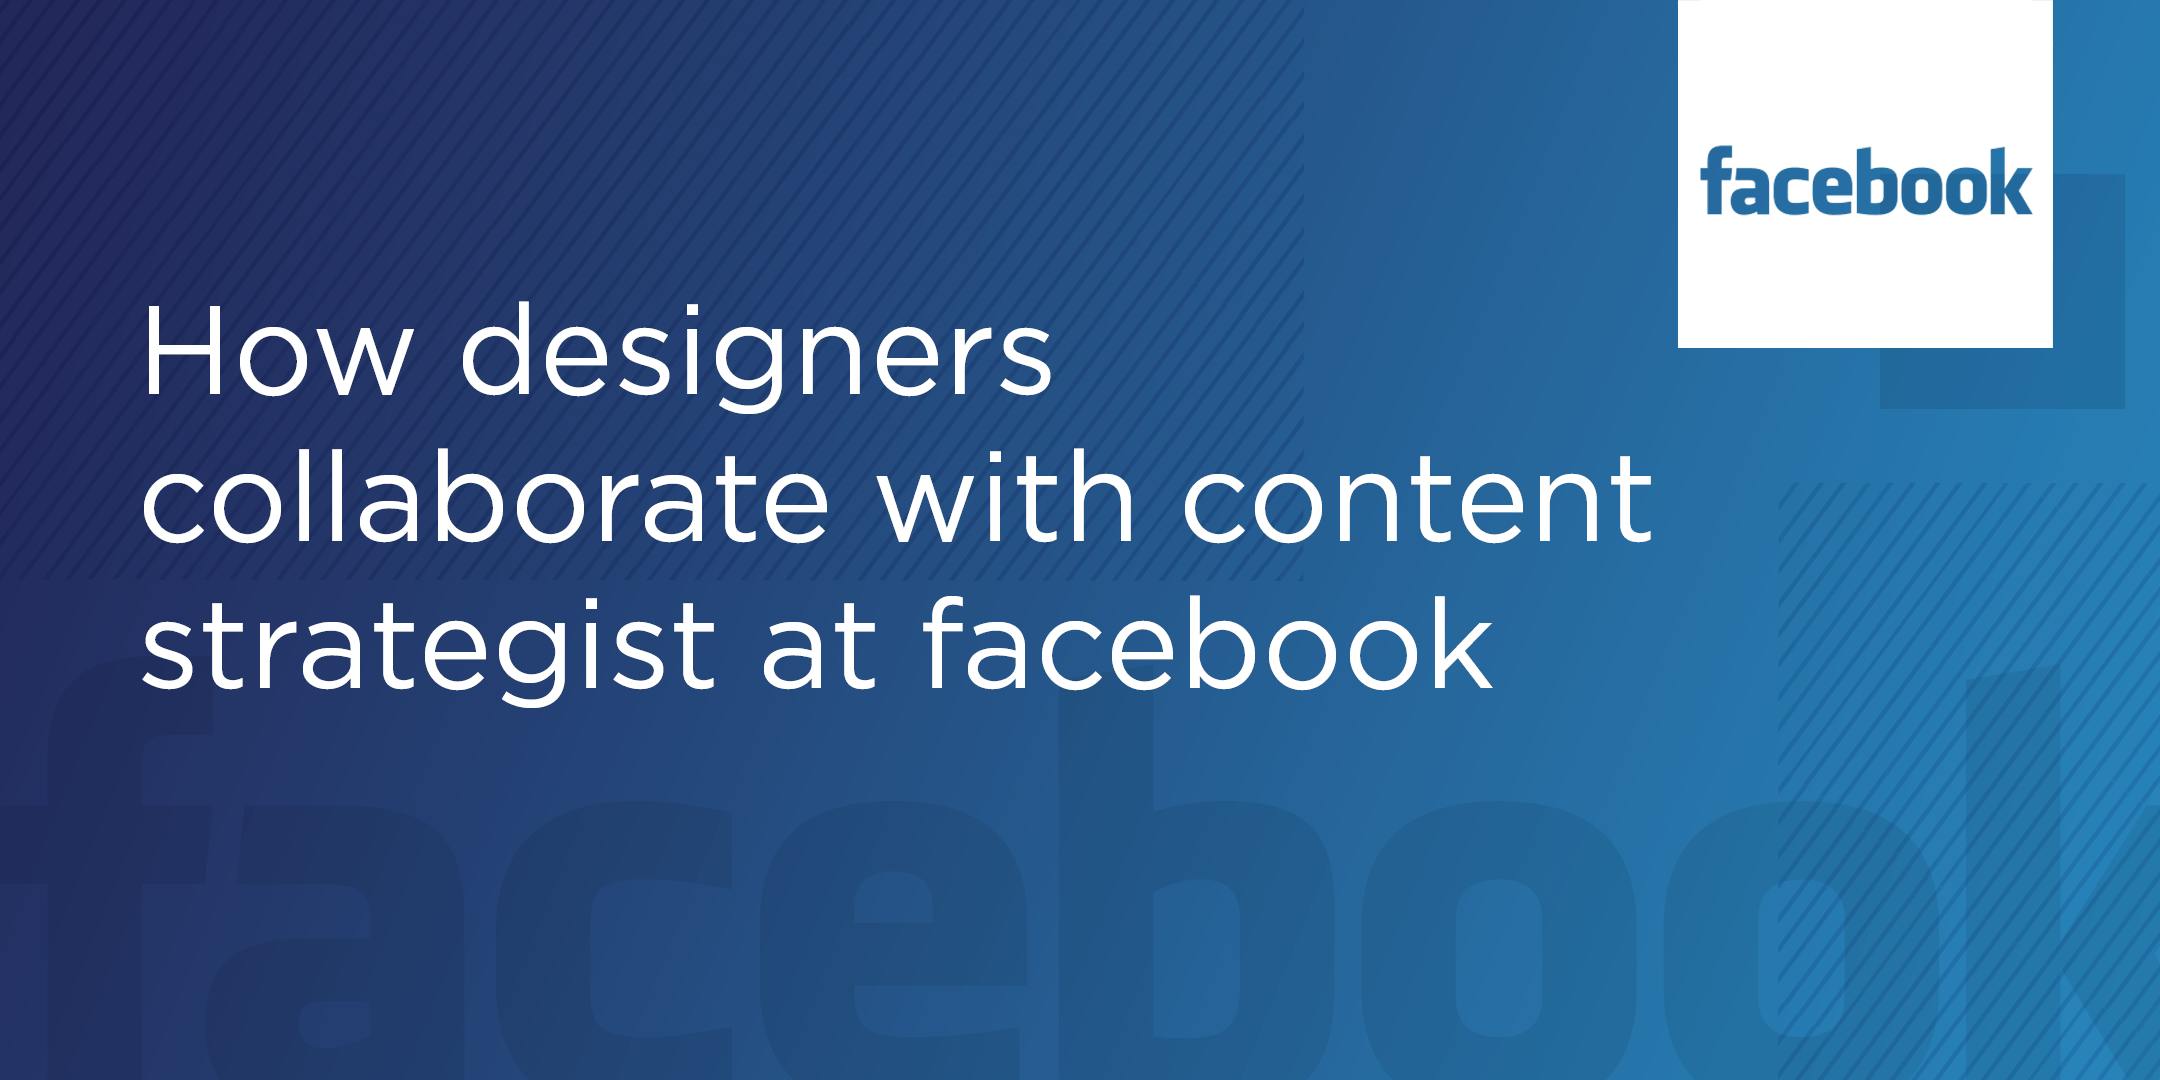 How designers collaborate with content strategists at Facebook